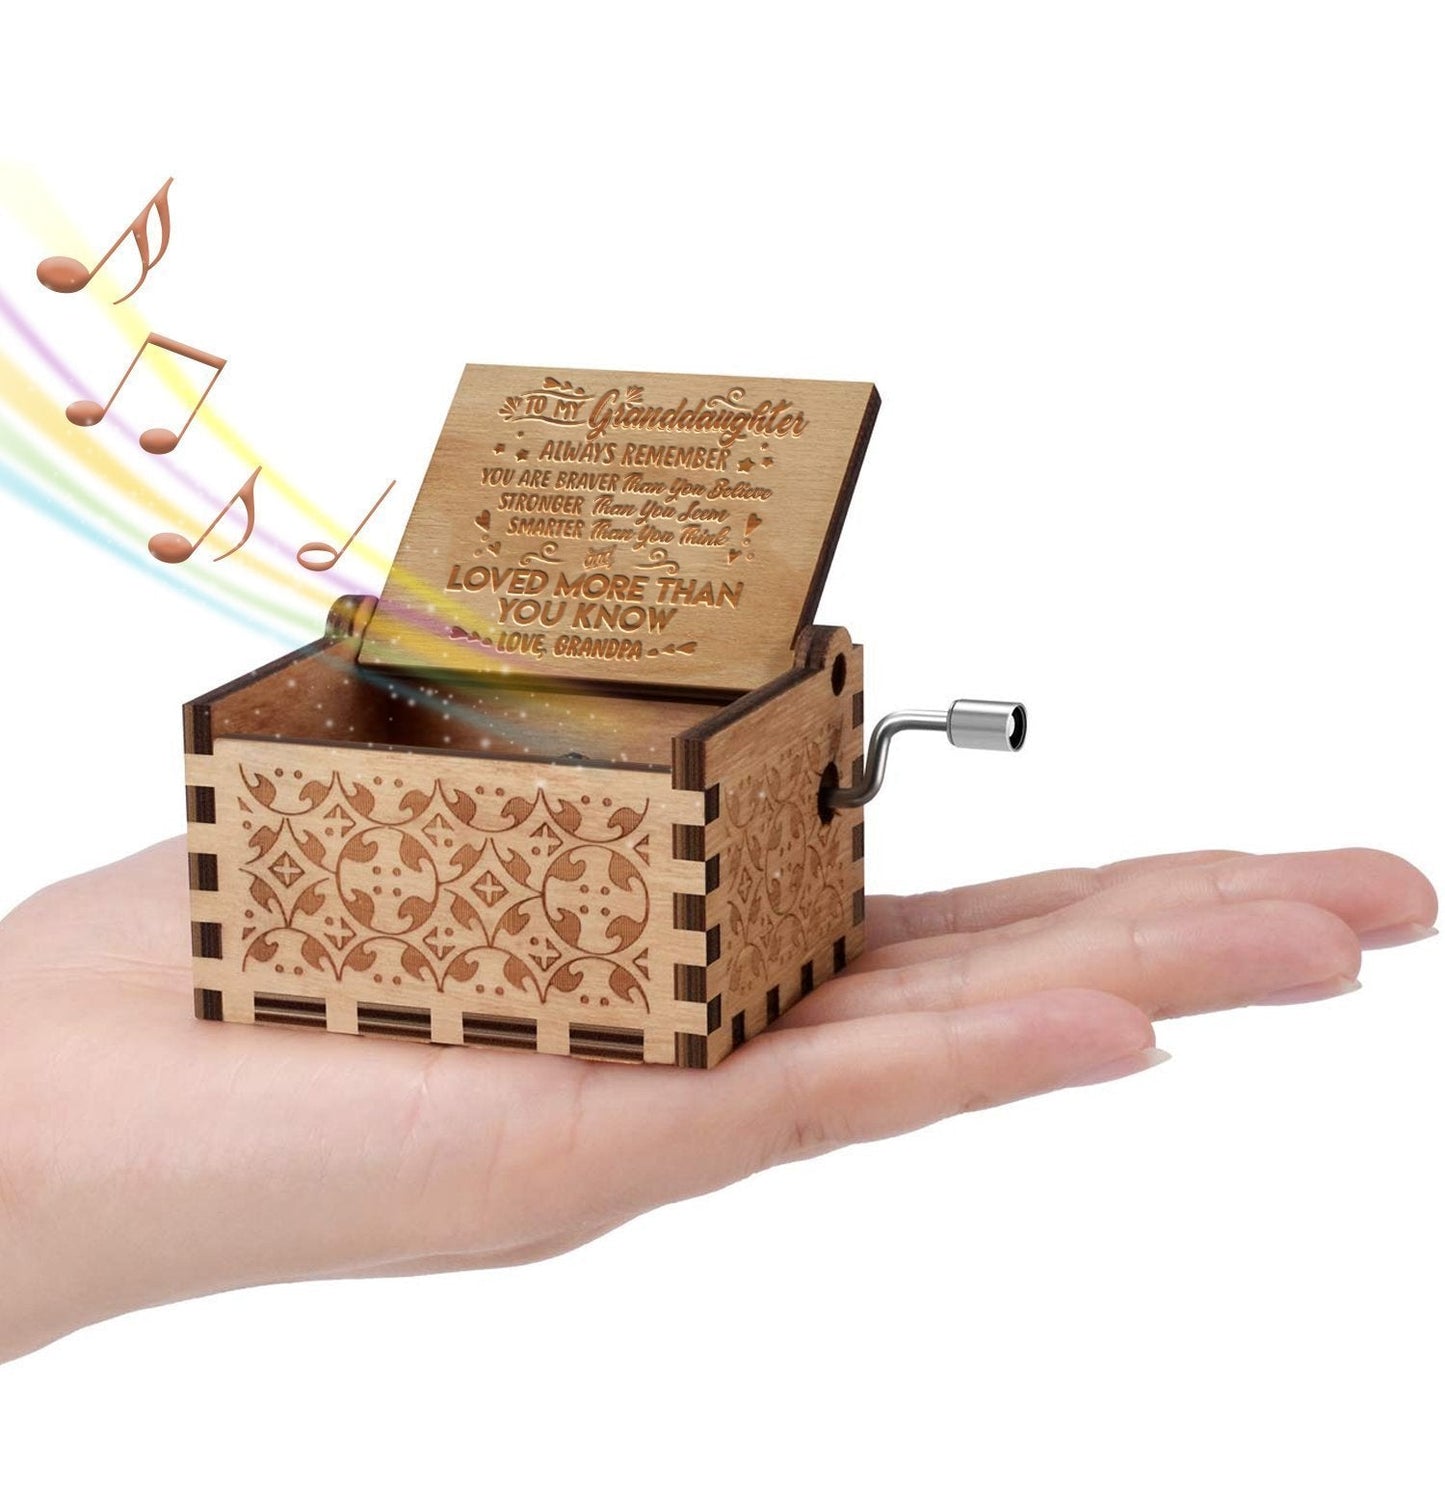 Grandpa To Granddaughter - You Are Loved More Than You Know - Engraved Music Box